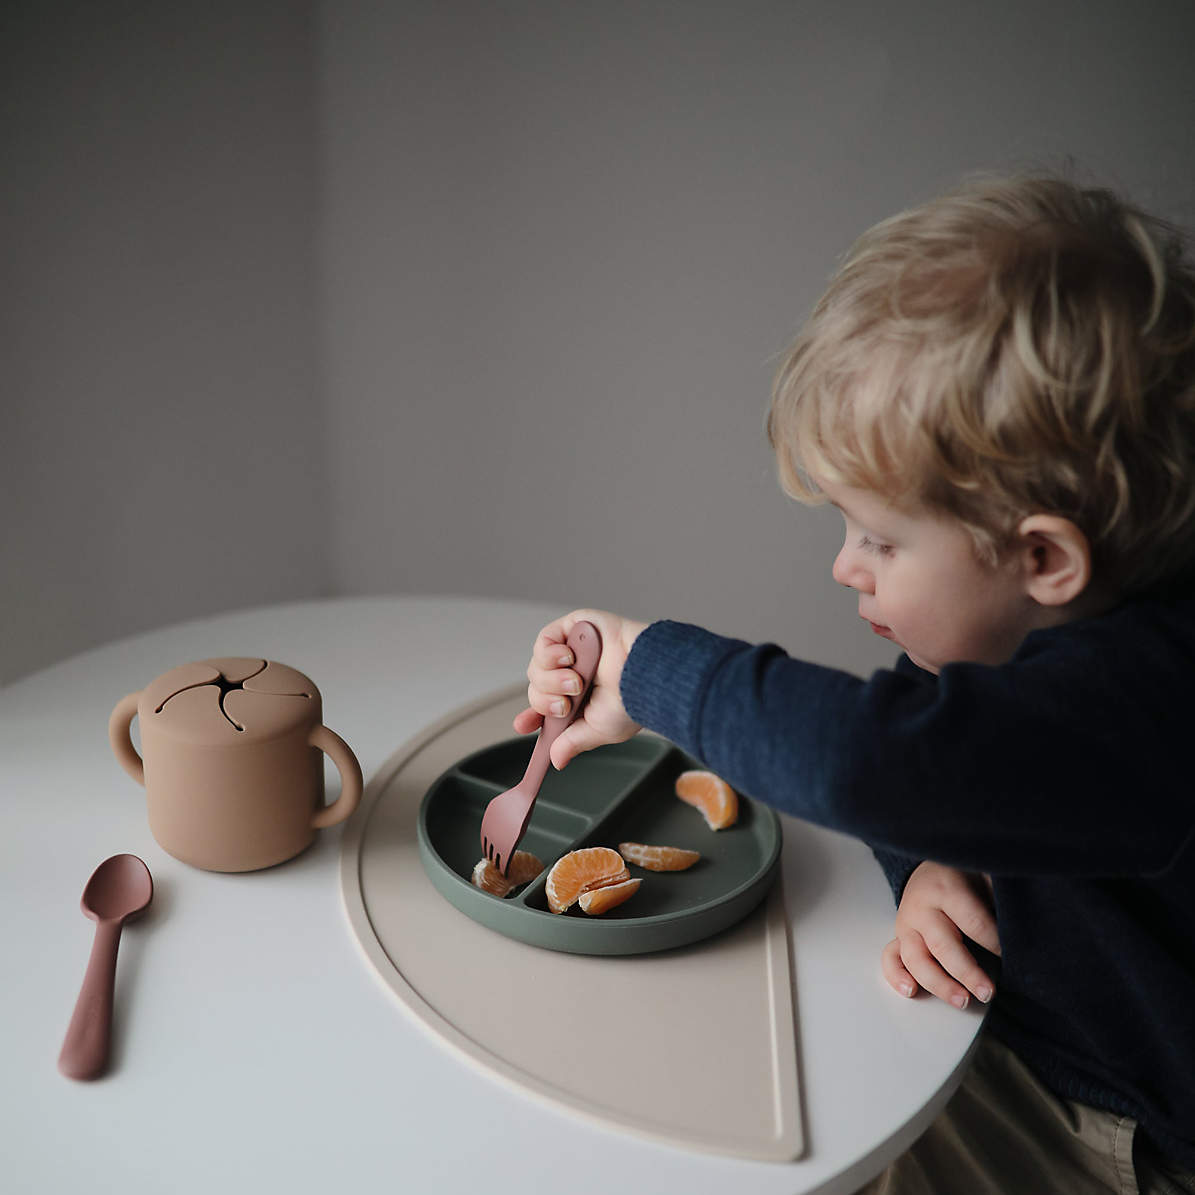 Mushie Tan Silicone Baby Placemat